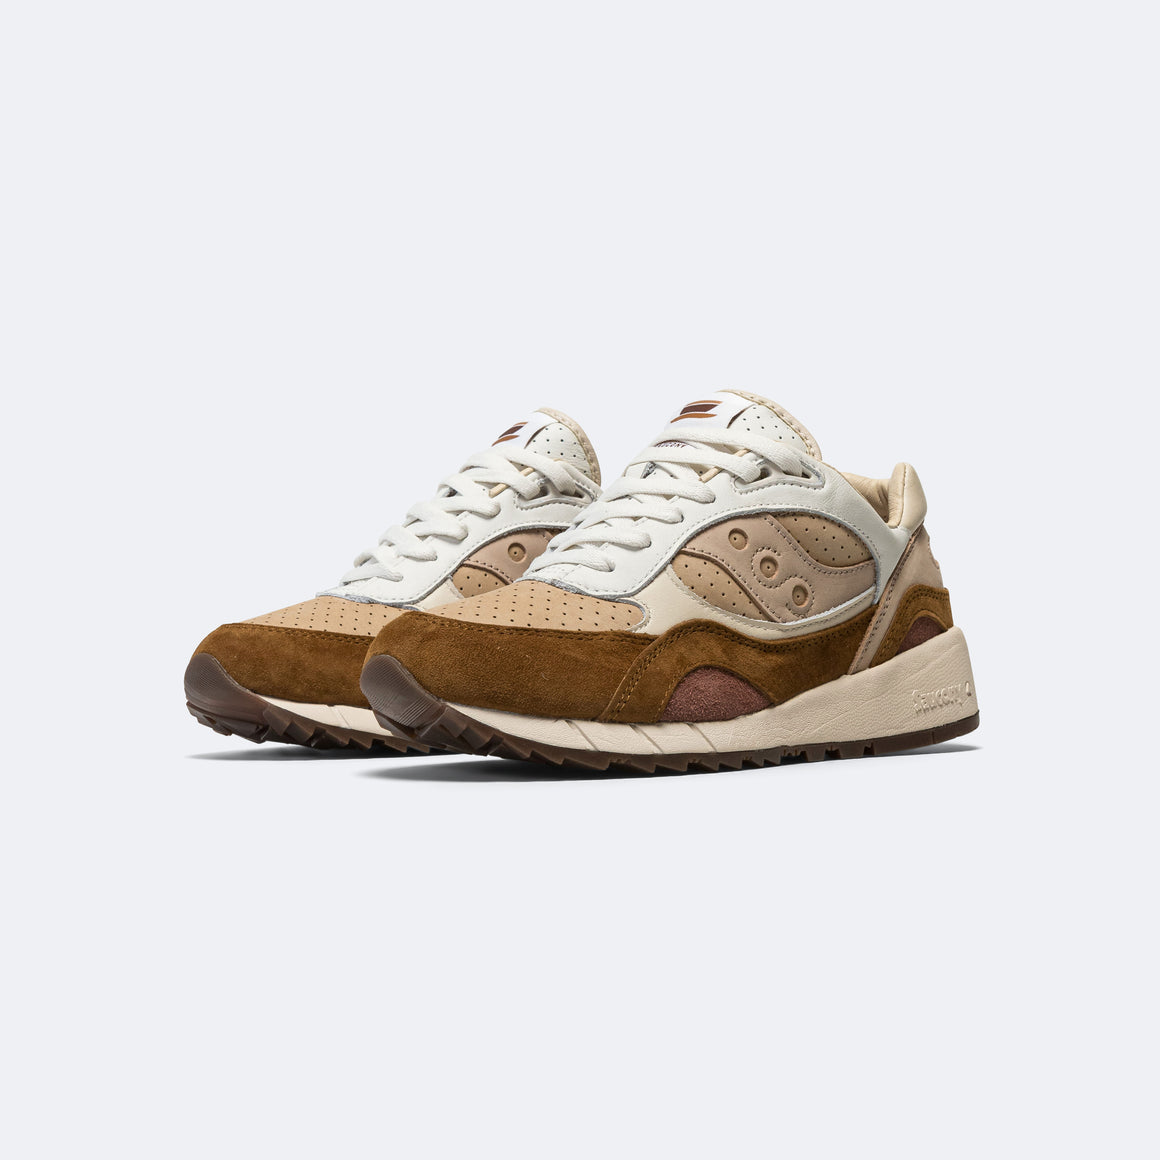 Shadow 6000 - White/Brown